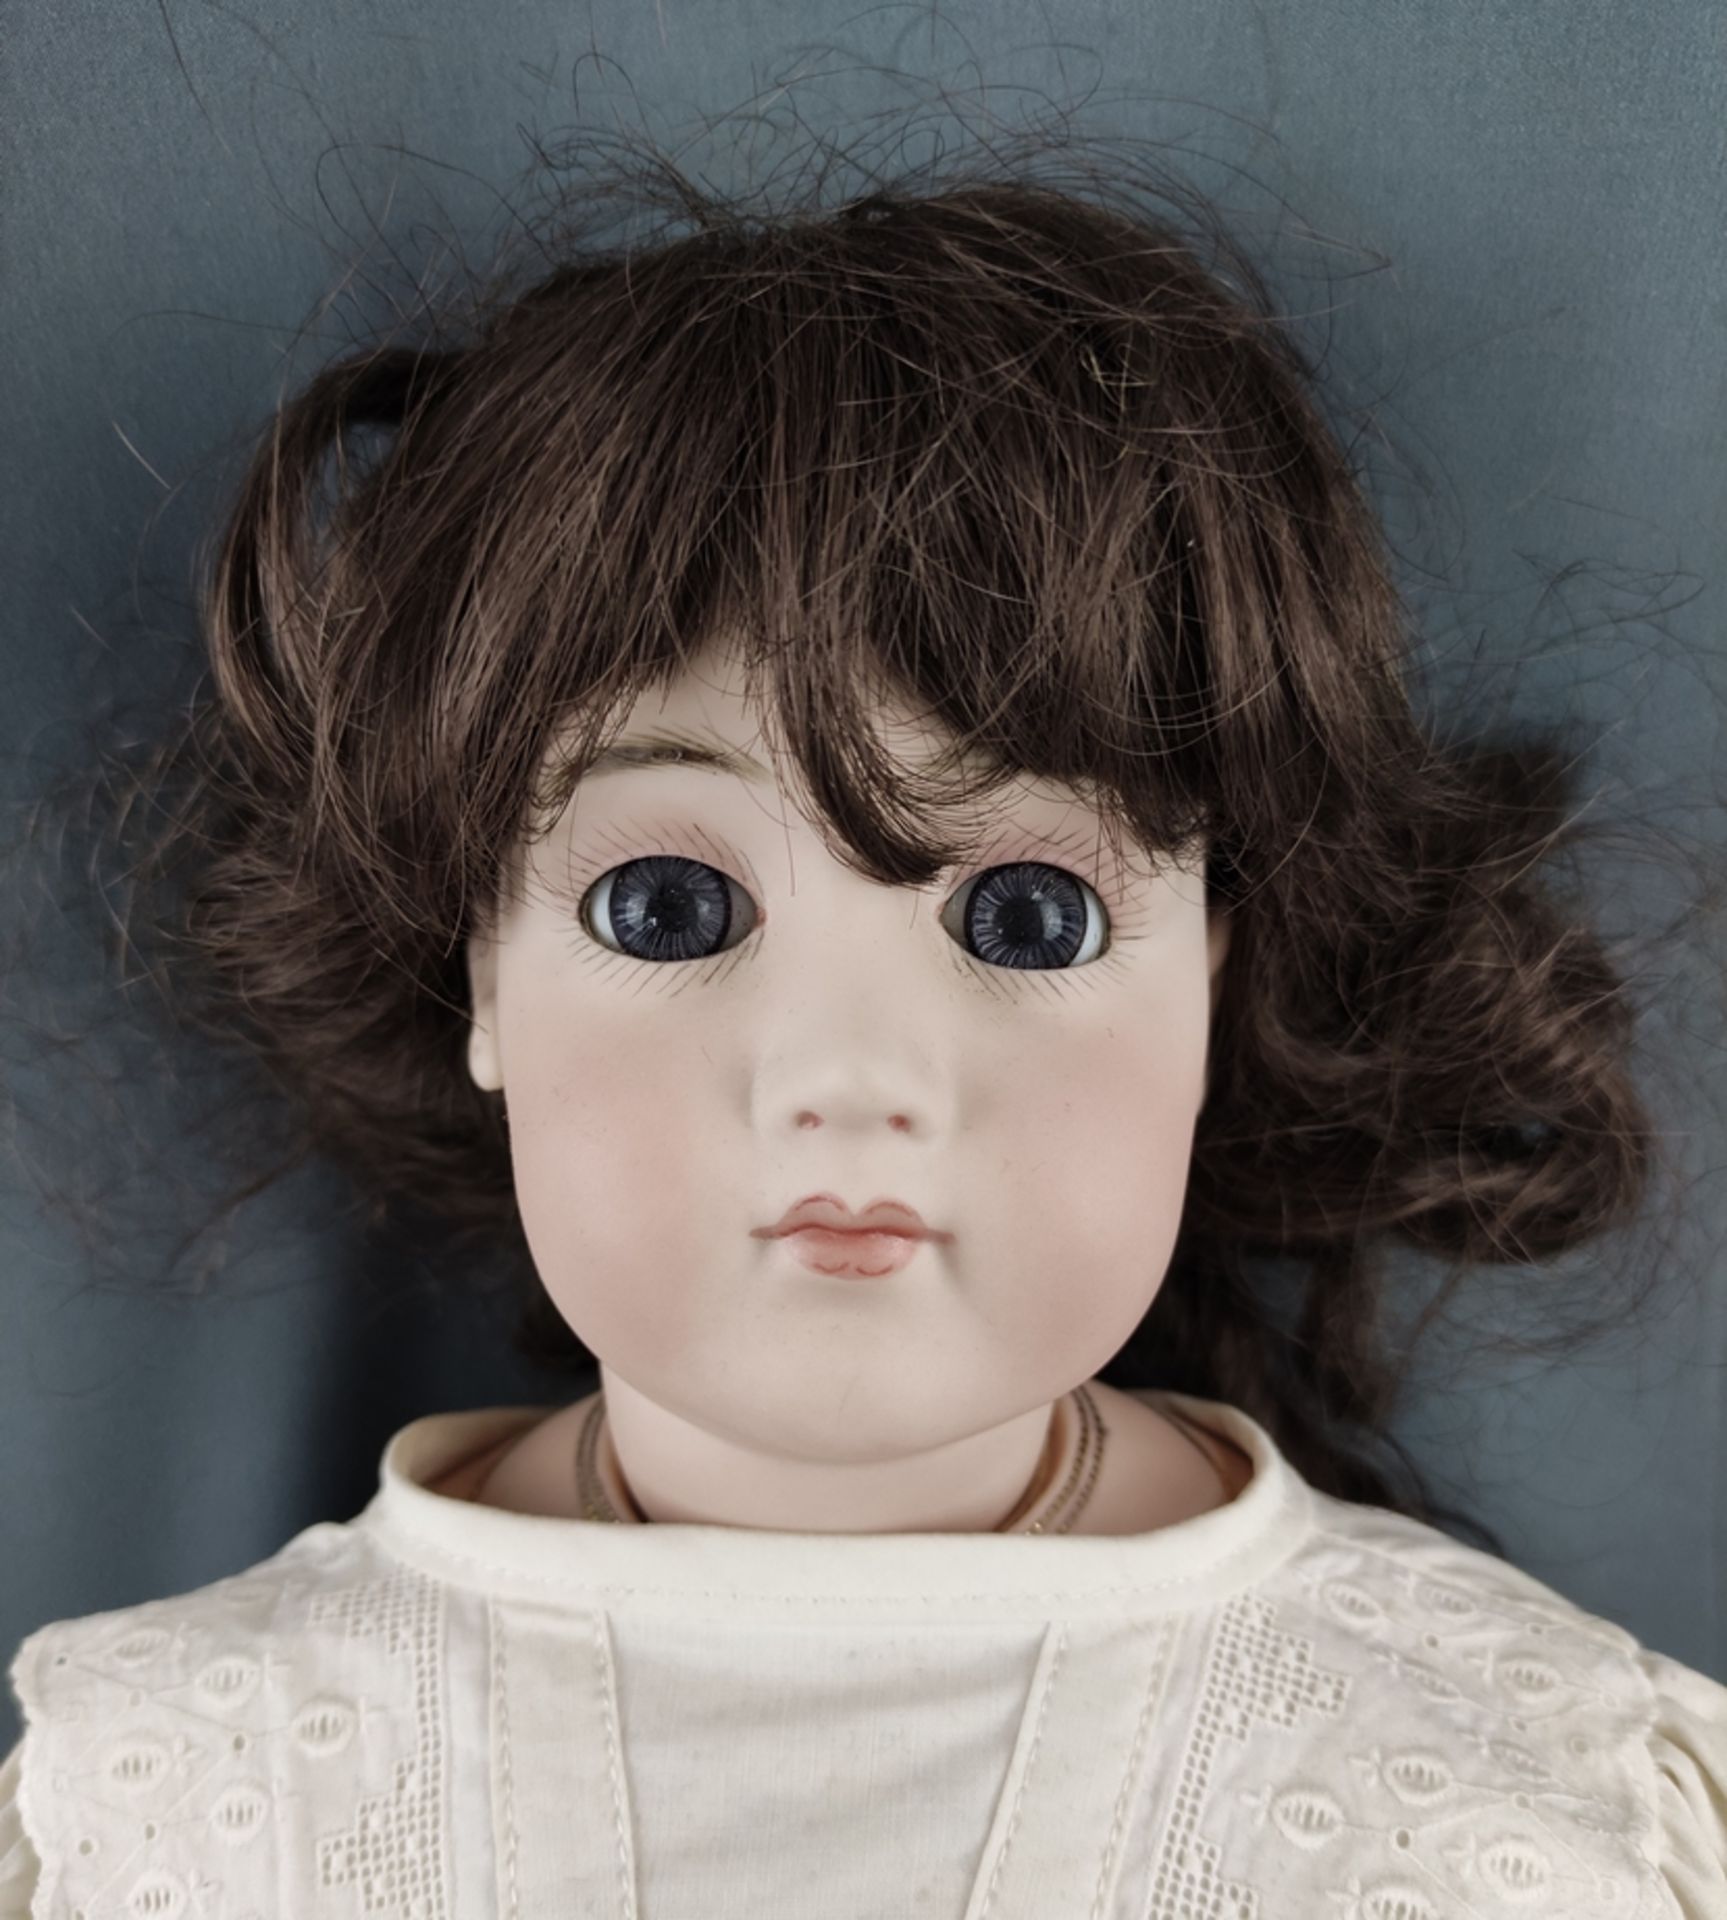 Two dolls, one with blue glass eyes, closed mouth and brown curly wig, head and hands made of bisqu - Image 4 of 5